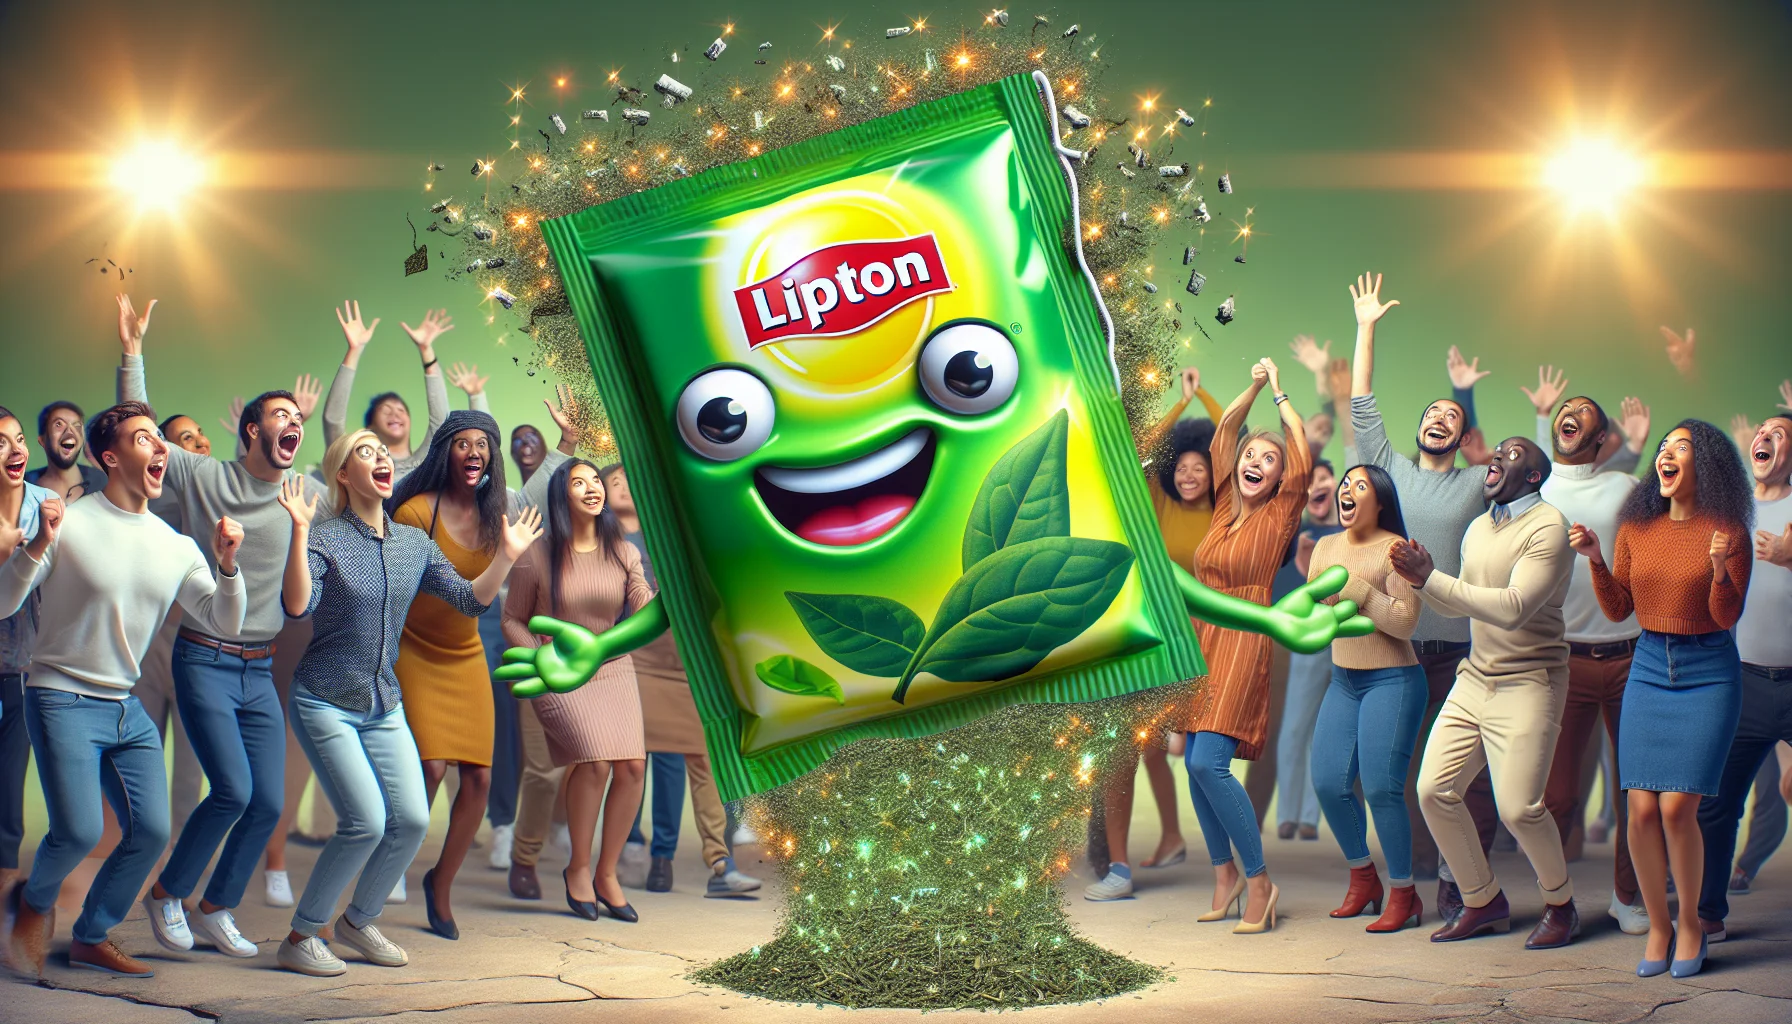 Create a surreal yet comical image of an animated Lipton green tea bag. The tea bag has cartoonish eyes and a wide grin, vividly showcasing its energetic personality - a representation of caffeine. It is hopping around in mid-air, spreading tiny sparkles of caffeine magic everywhere. In the background, a group of diverse individuals, male, female, and non-binary of varying descents like Caucasian, Black, Hispanic, Middle-Eastern, and South-Asian, are watching in amusement, their faces lighting up in delight, eagerly reaching out to capture the sparking caffeine magic. They seem ready to join in the fun, promoting a fun way to enjoy Lipton Green Tea.